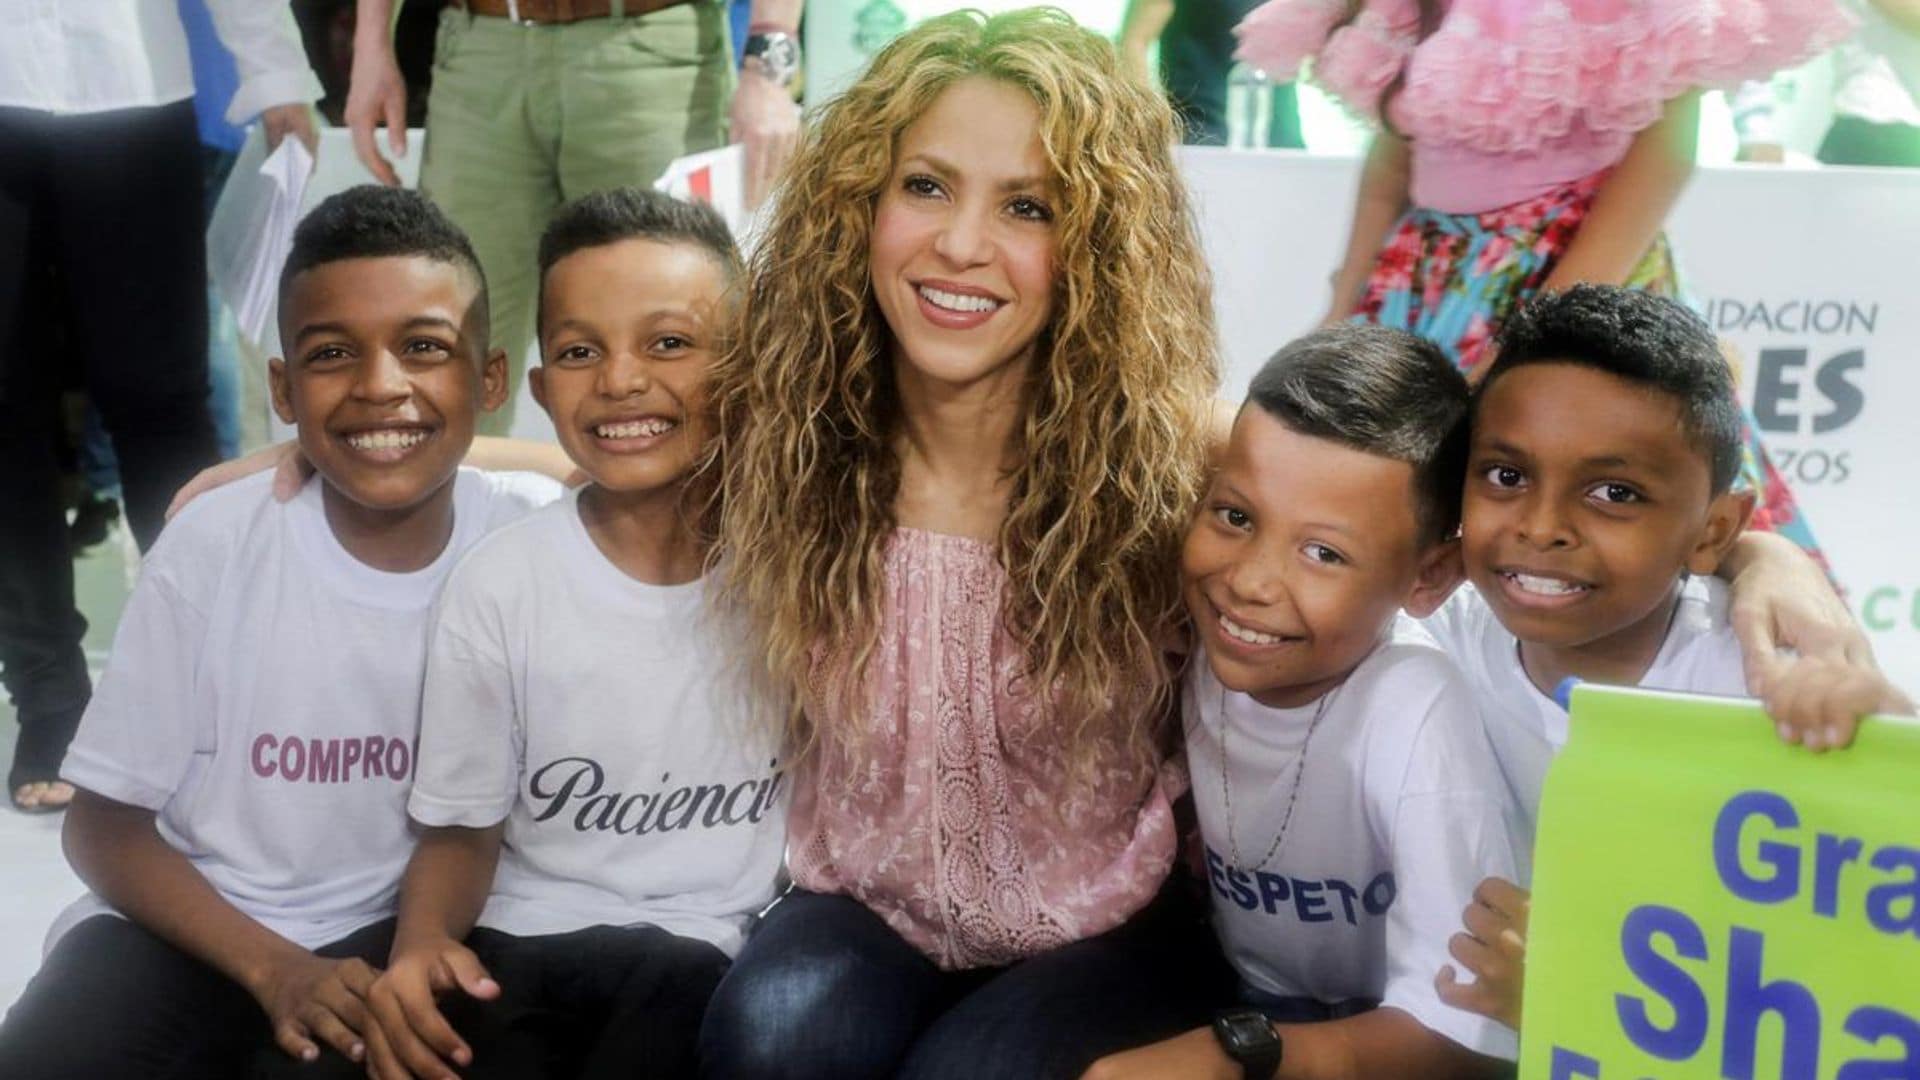 Shakira’s newest statue is set to become a cultural reference in Barranquilla